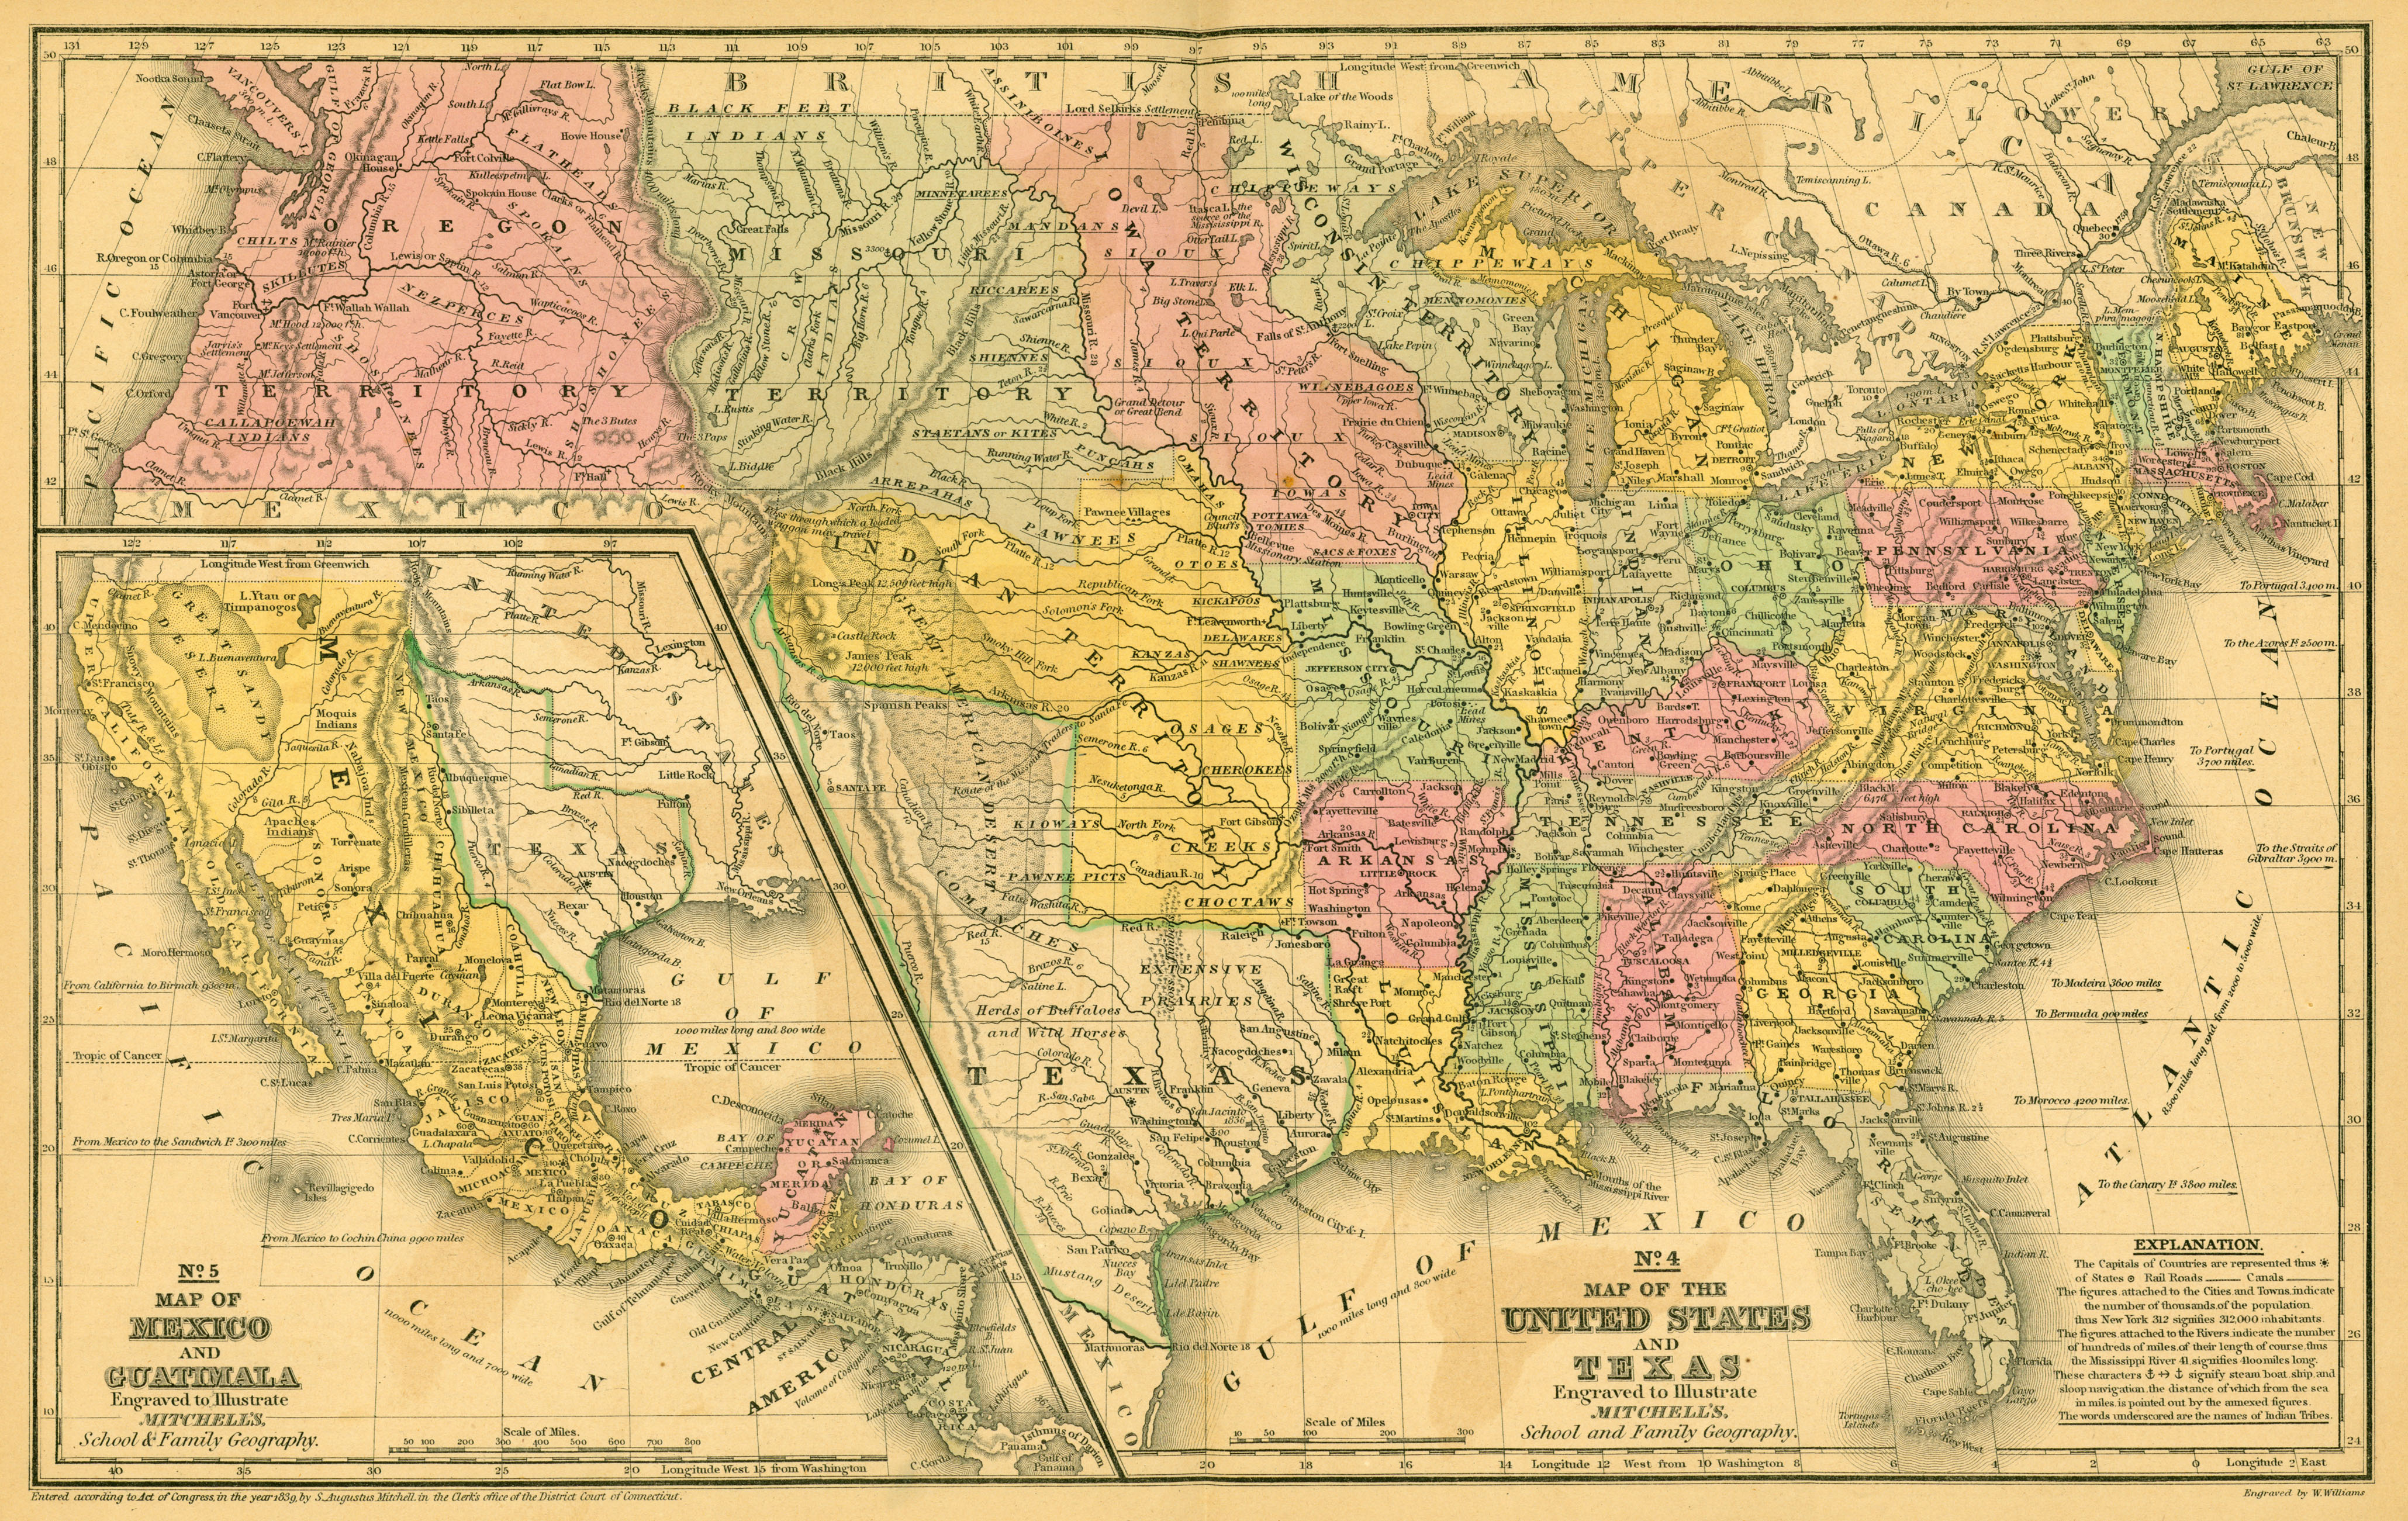 Texas Historical Maps - Perry-Castañeda Map Collection - Ut Library - Old Texas Map